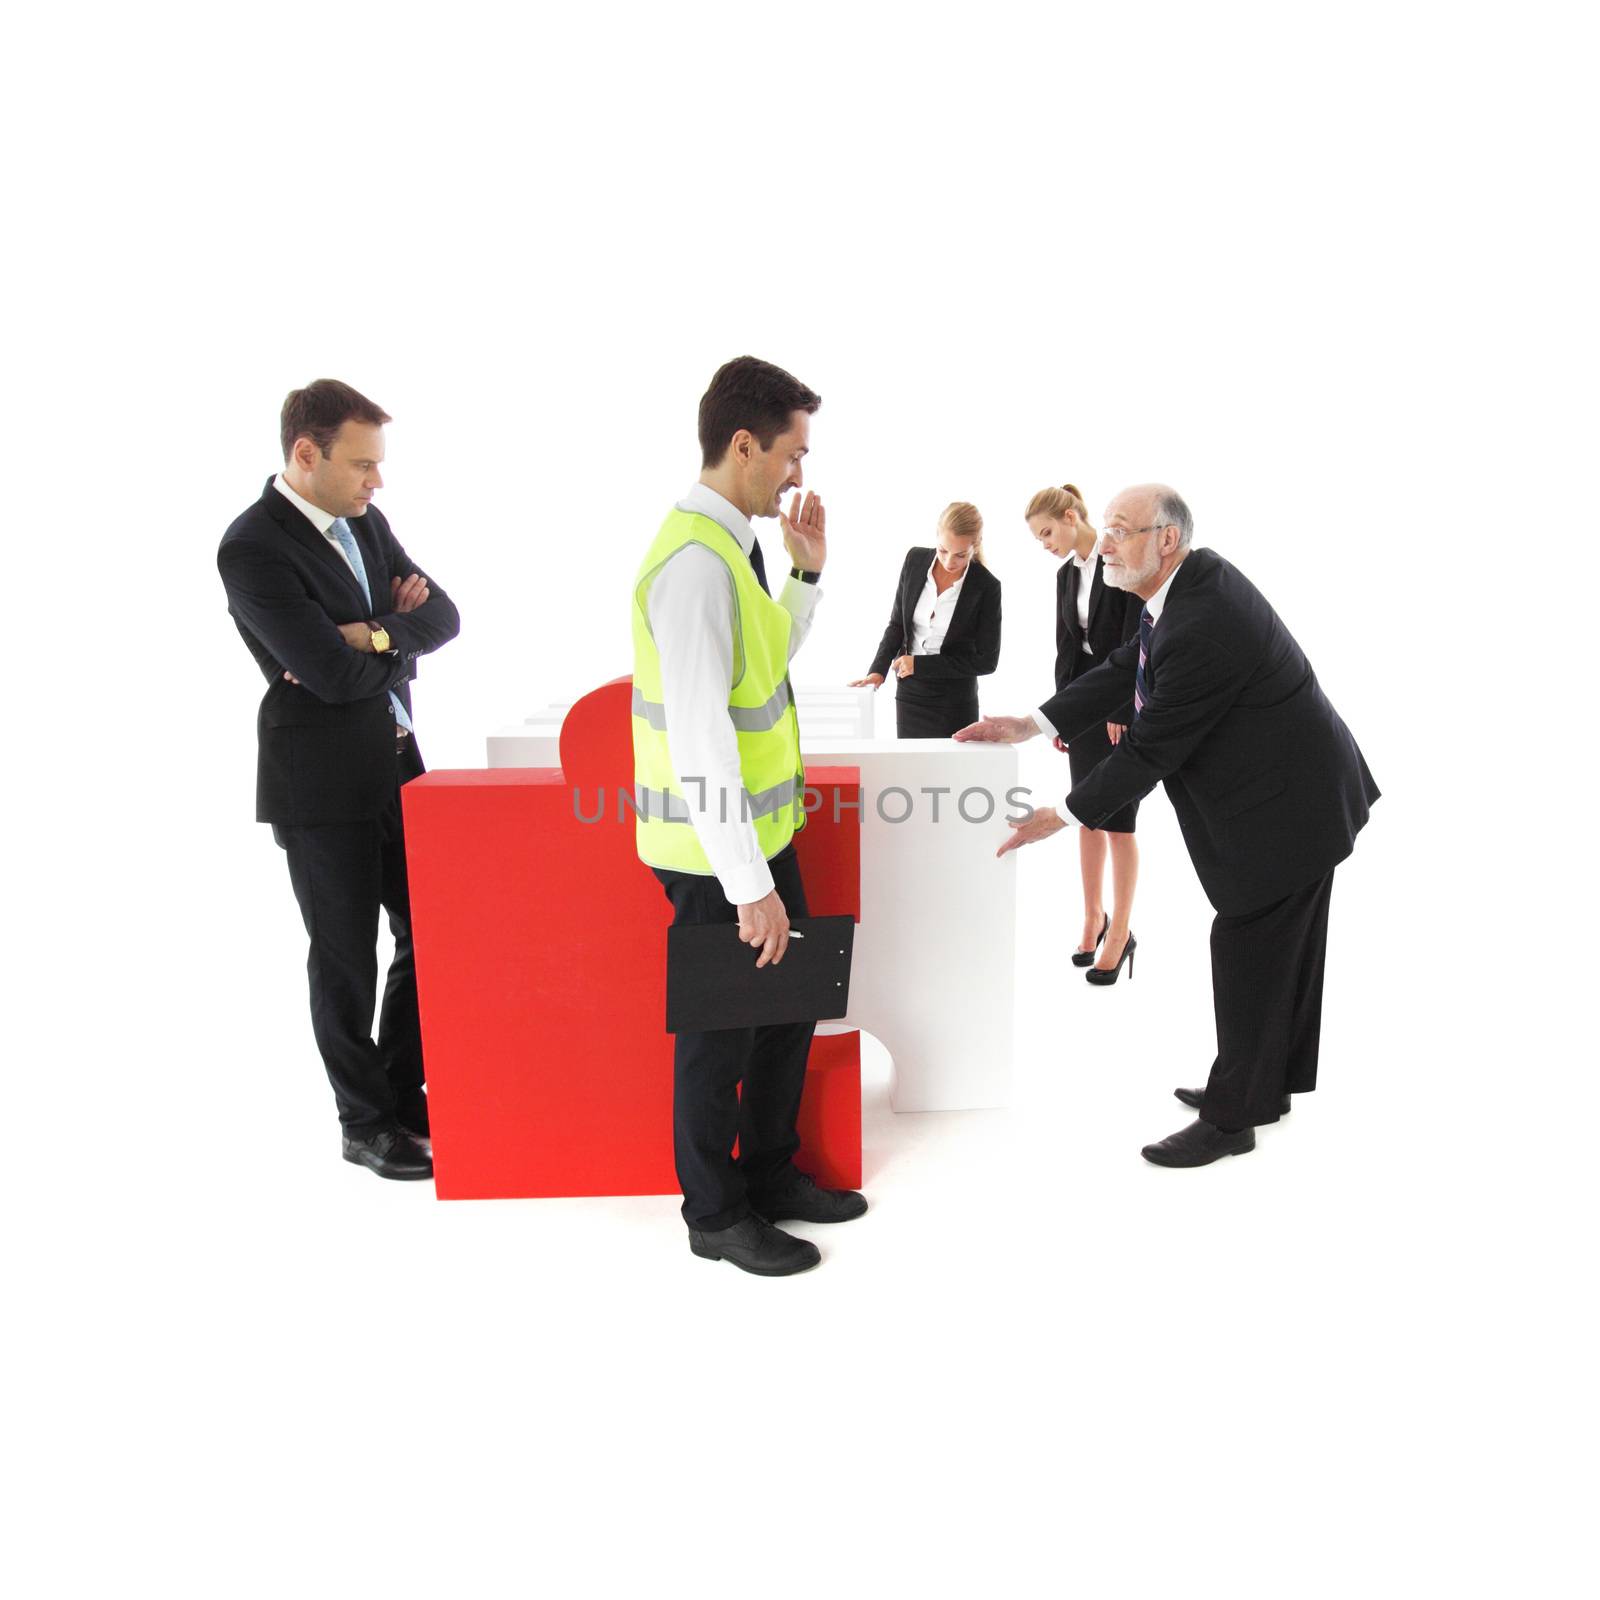 Group of business people recieving jigsaw puzzle of business isolated on white background